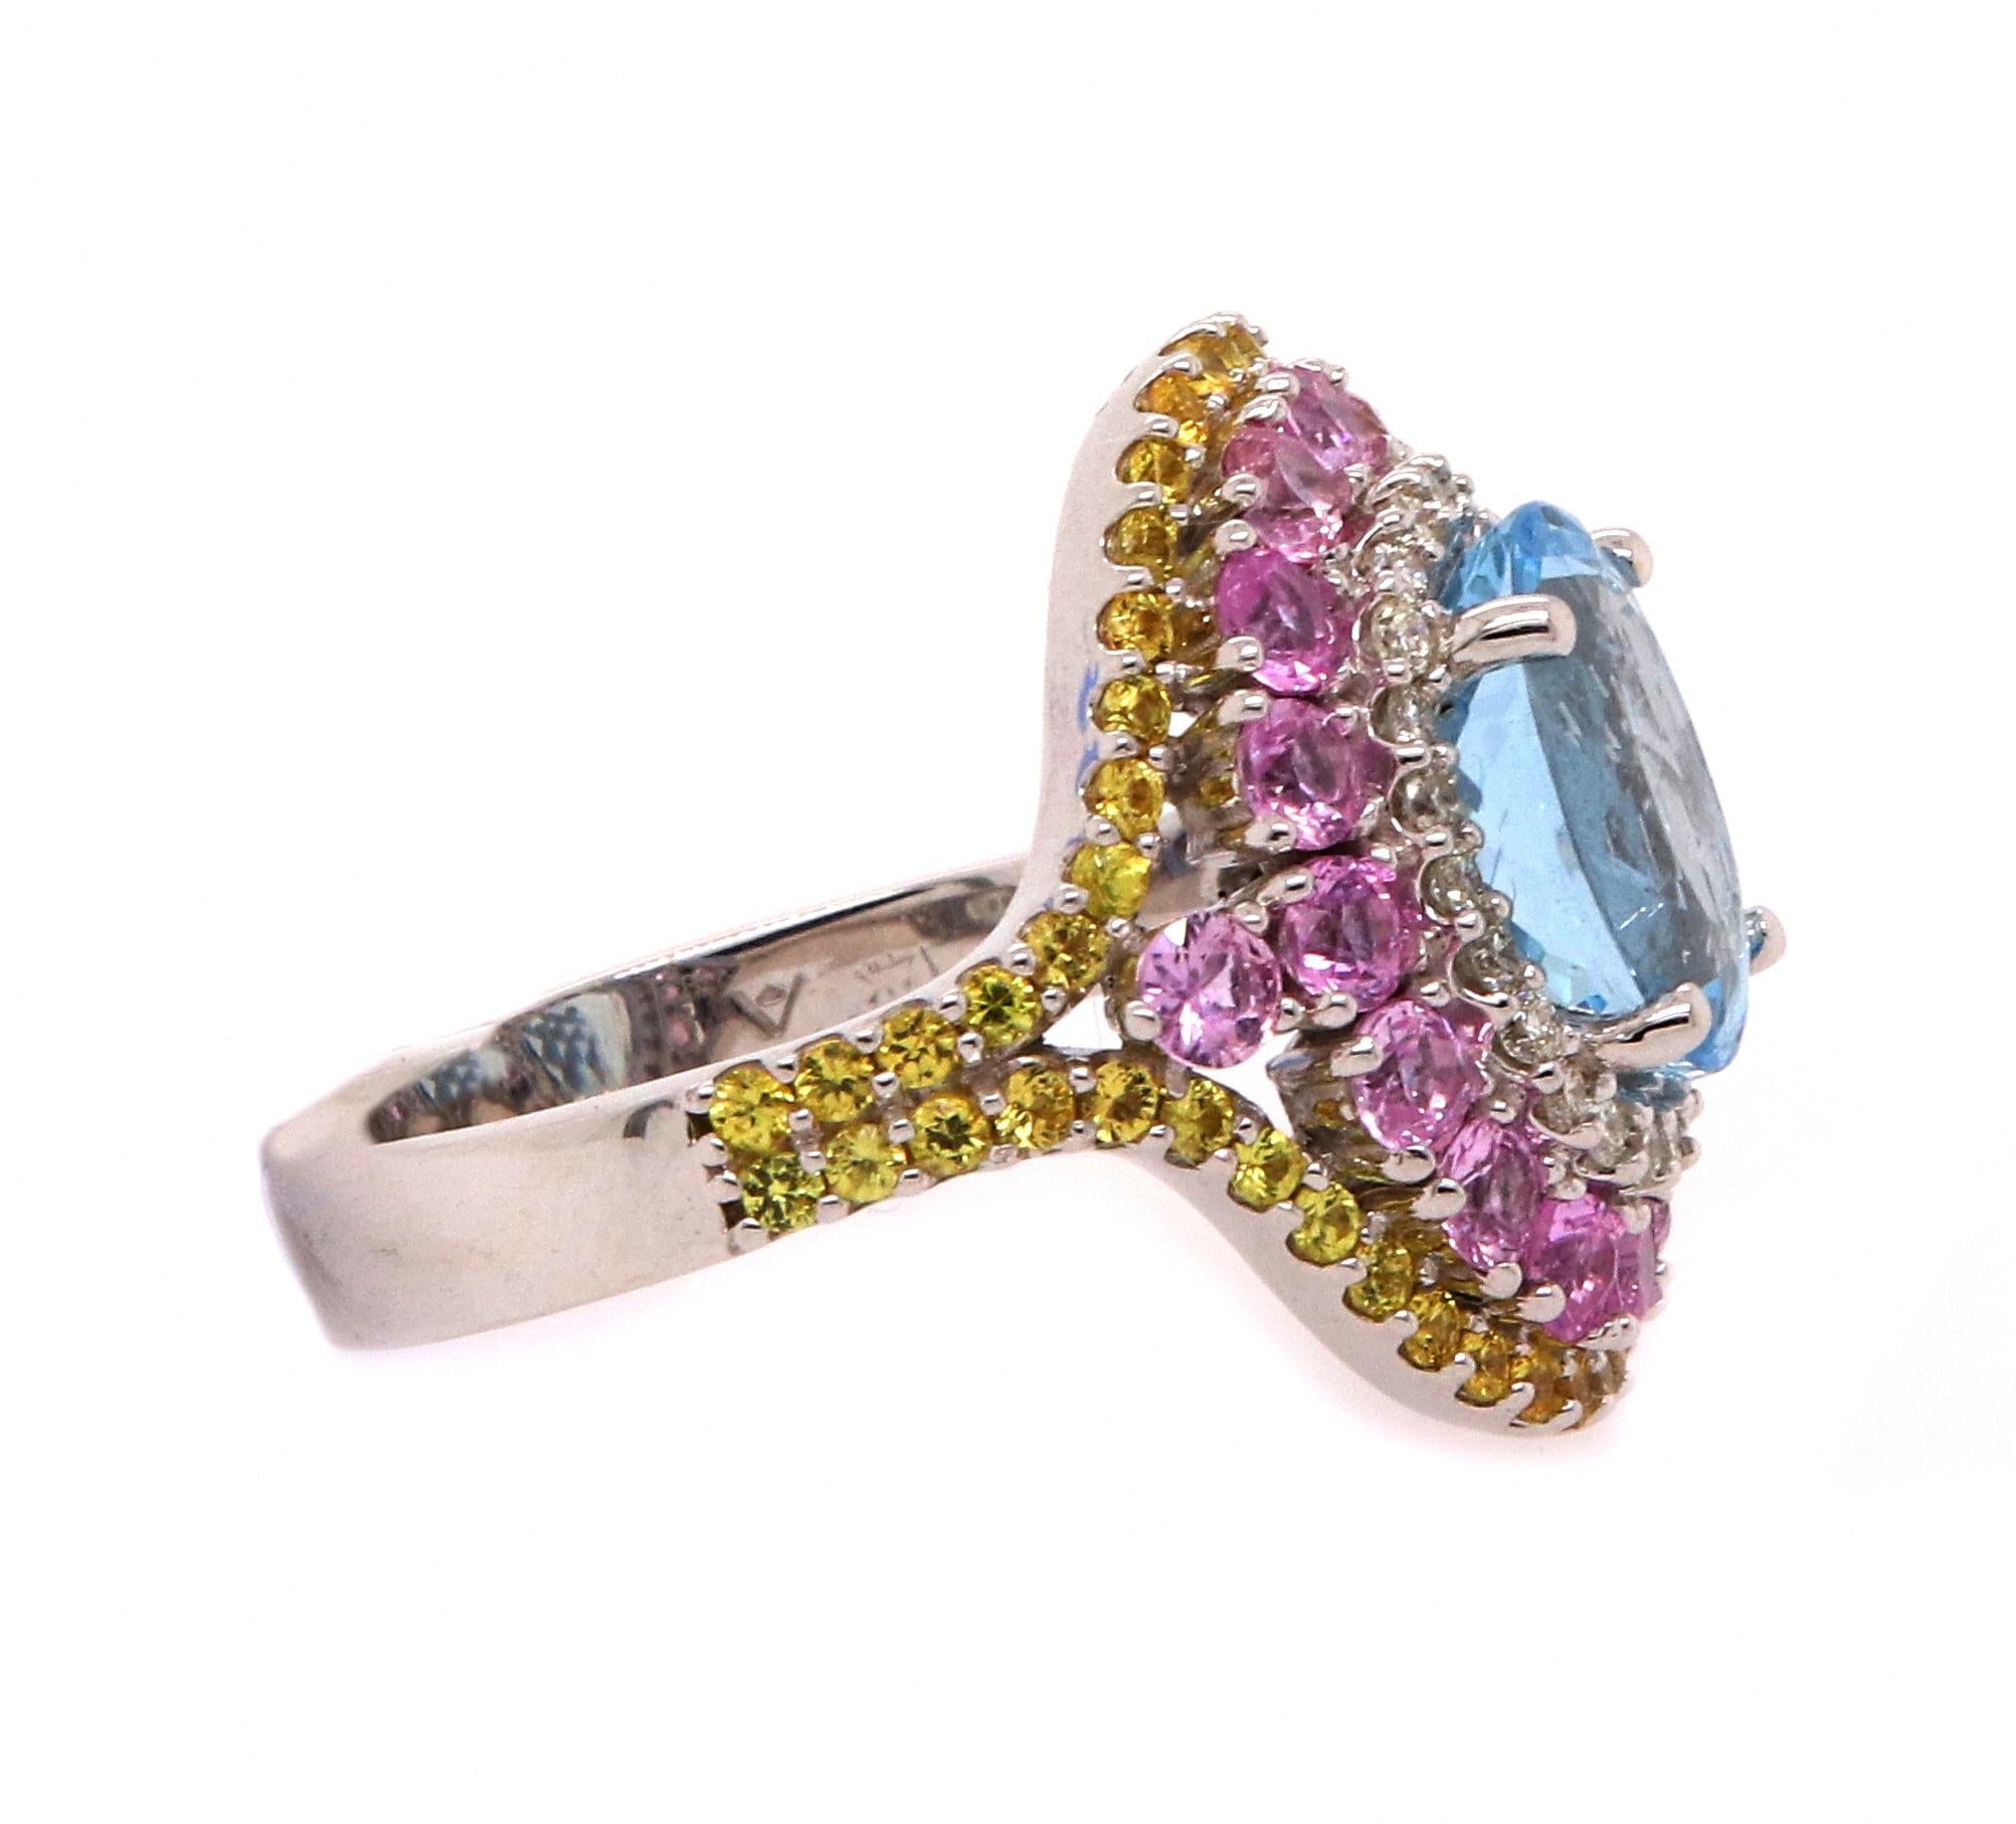 Material: 14k White Gold 
Center Stone Details: 1 Oval Aquamarine at 2.50 Carats - Measuring 10 x 8 mm
Mounting Stone Details: 18 Round Pink Sapphires at 1.41 Carats
Mounting Stone Details: 54 Round Yellow Sapphires at 0.65 Carats
Diamond Details: